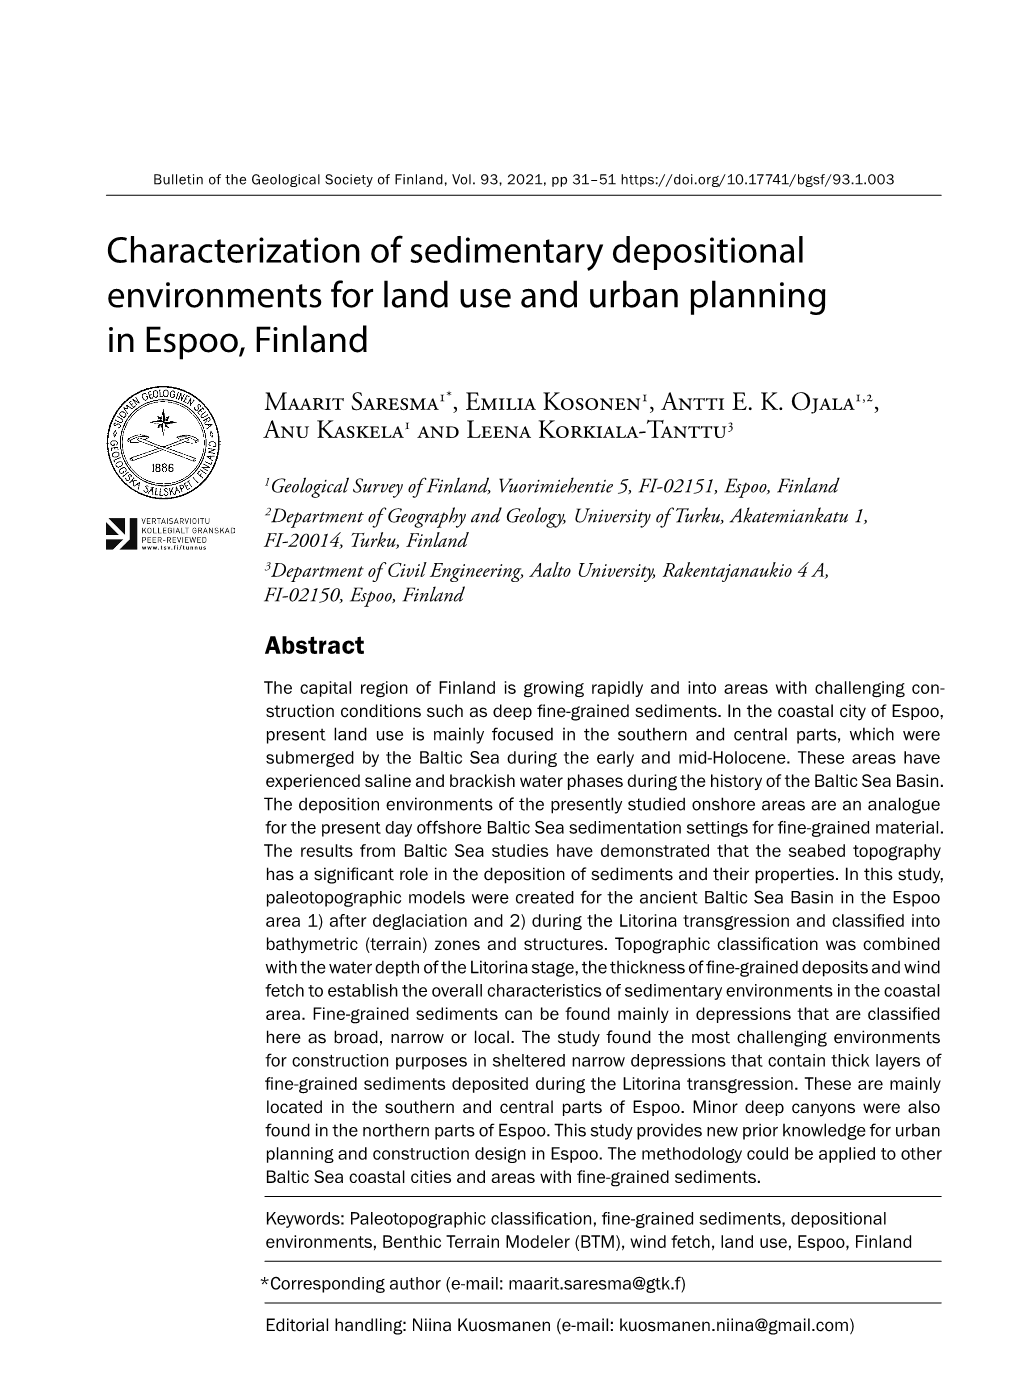 Characterization of Sedimentary Depositional Environments for Land Use and Urban Planning in Espoo, Finland